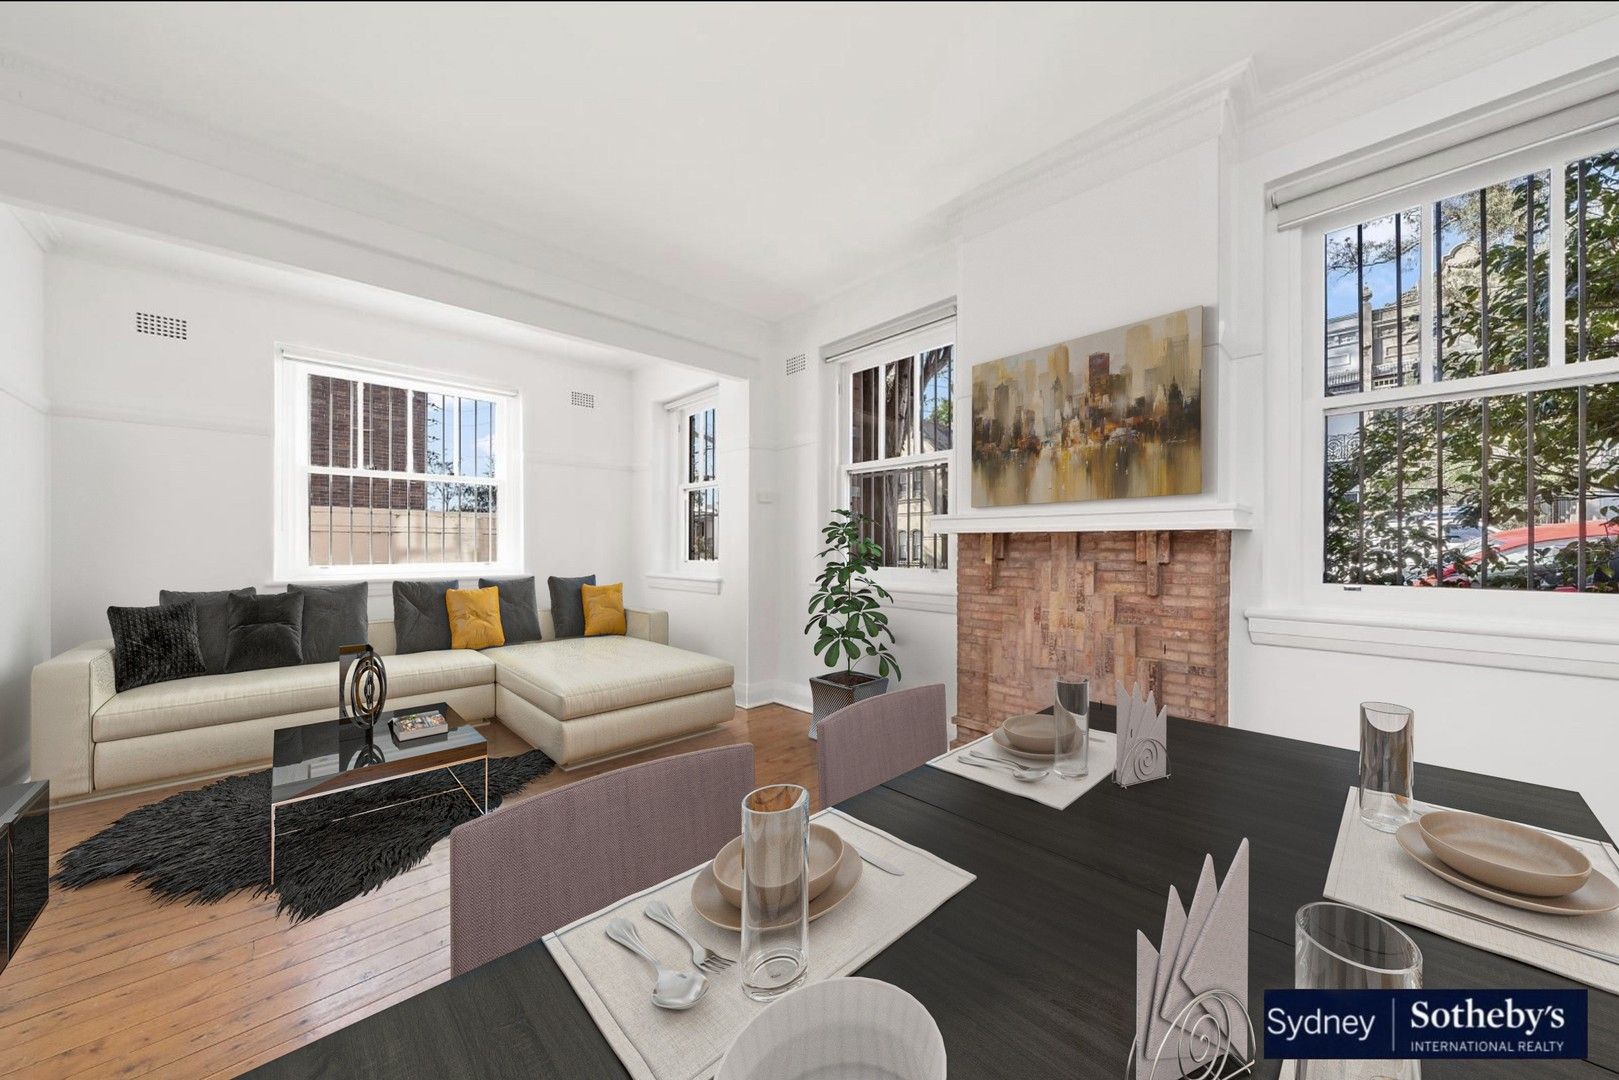 2 bedrooms Apartment / Unit / Flat in 1/28 Junction Street WOOLLAHRA NSW, 2025